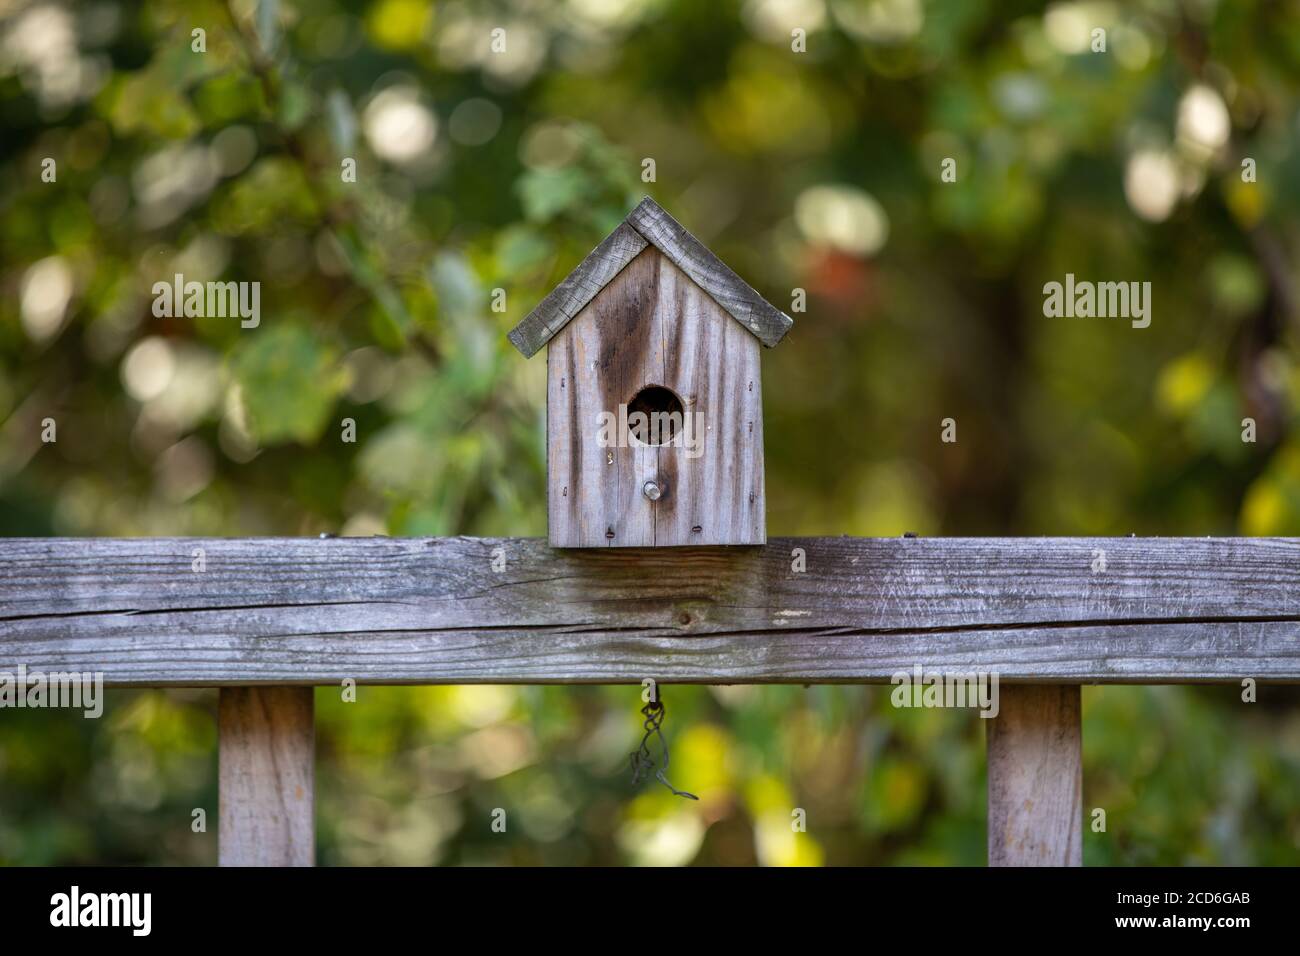 NORTH CAROLINA, UNITED STATES - Sep 22, 2019: Wooden house for birds in the backyard Stock Photo